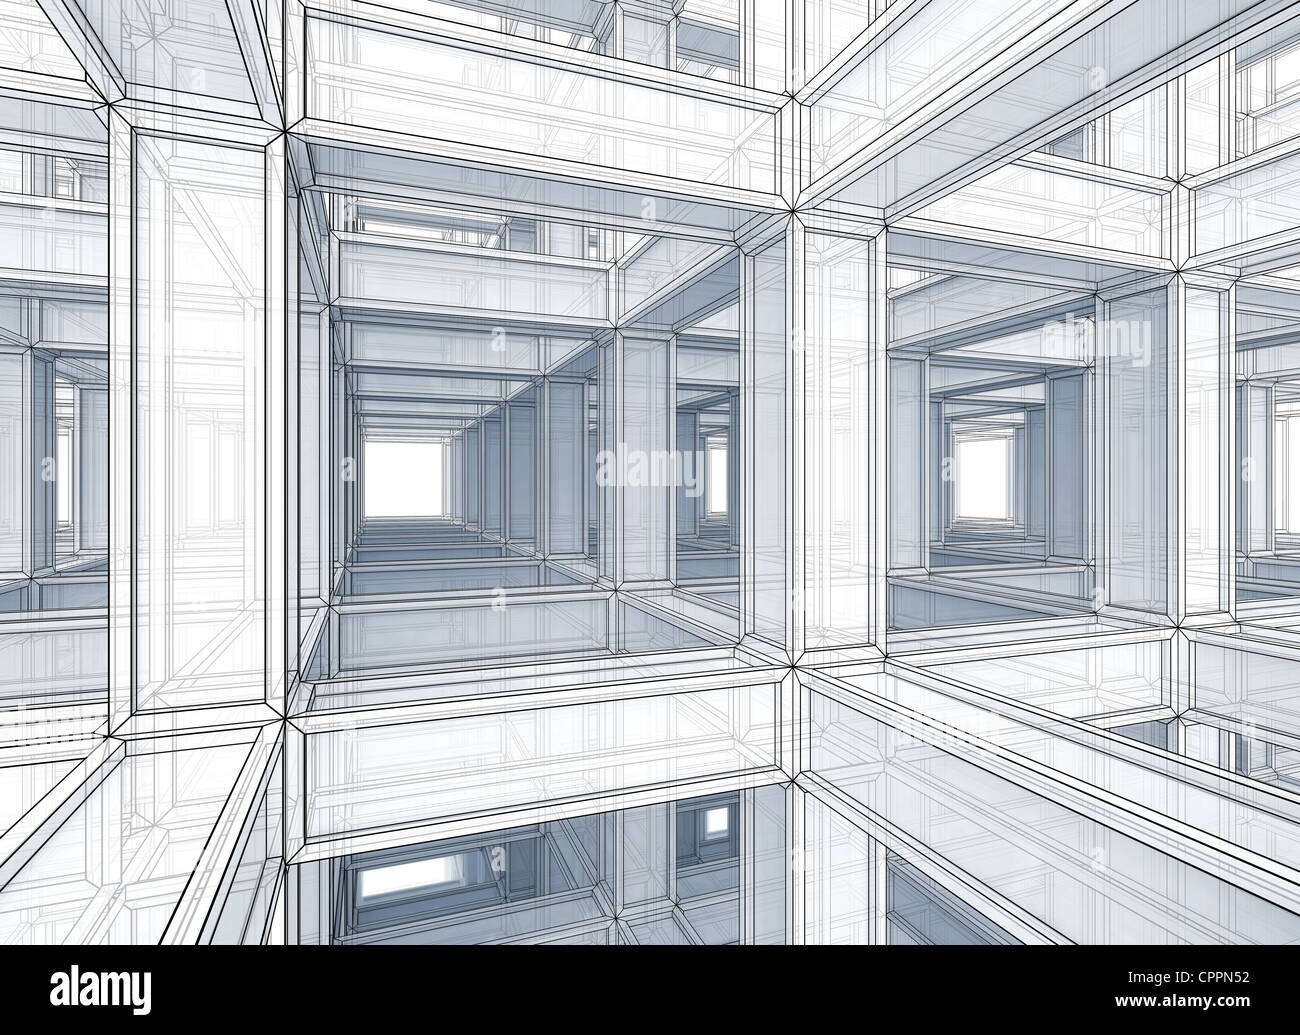 Perspective Drawing: Two Point Perspective - Institute of Classical  Architecture & Art